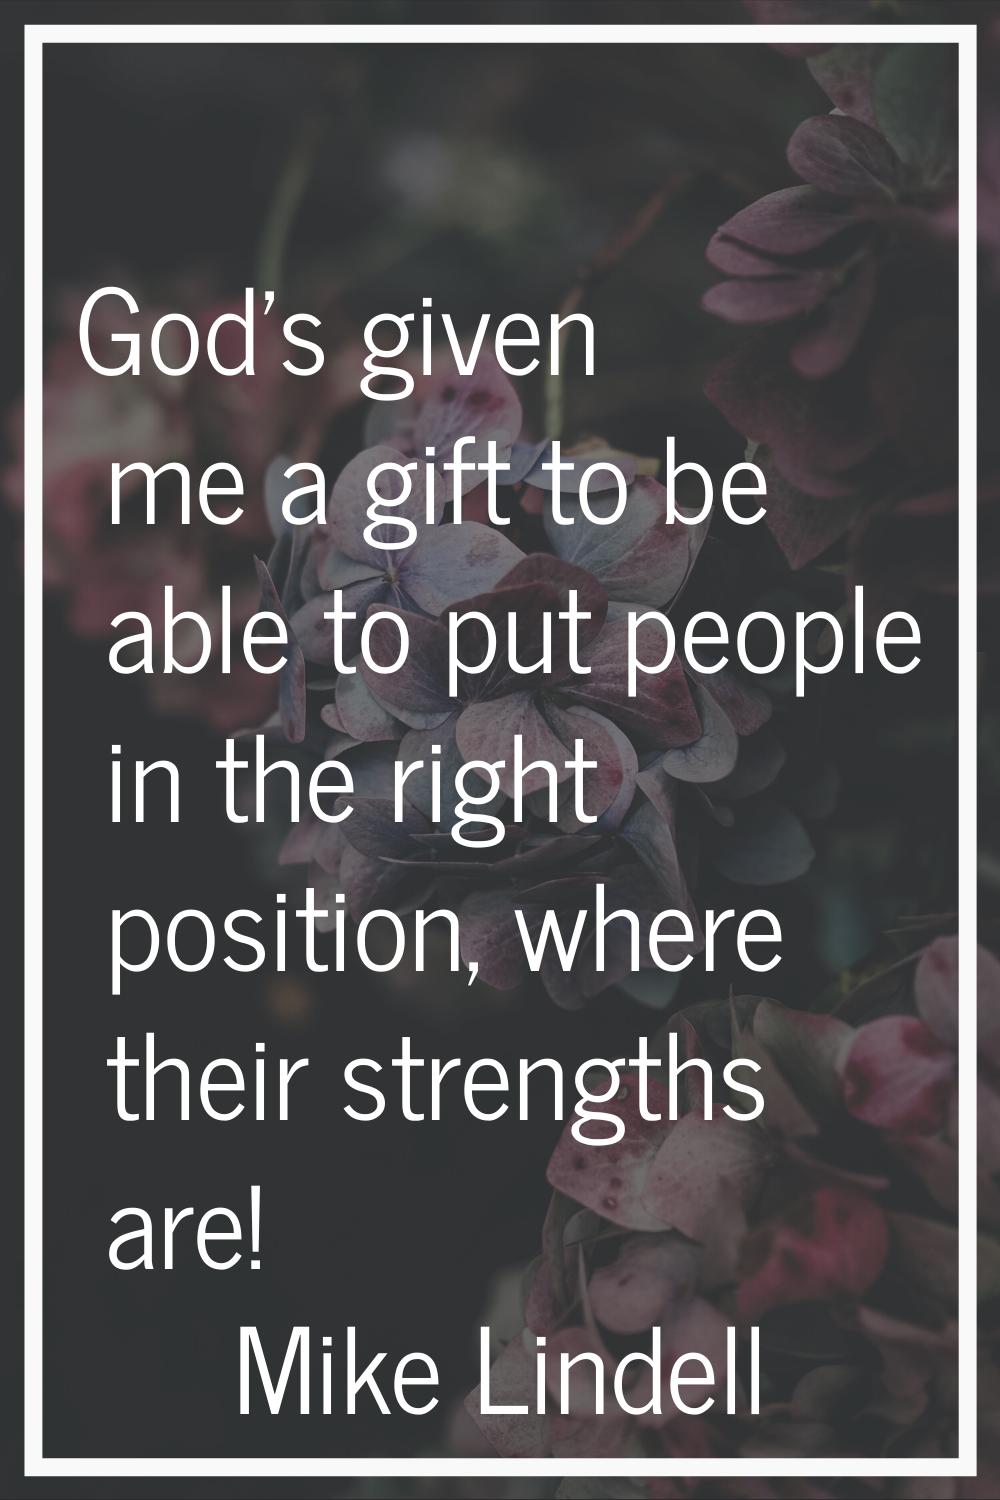 God's given me a gift to be able to put people in the right position, where their strengths are!